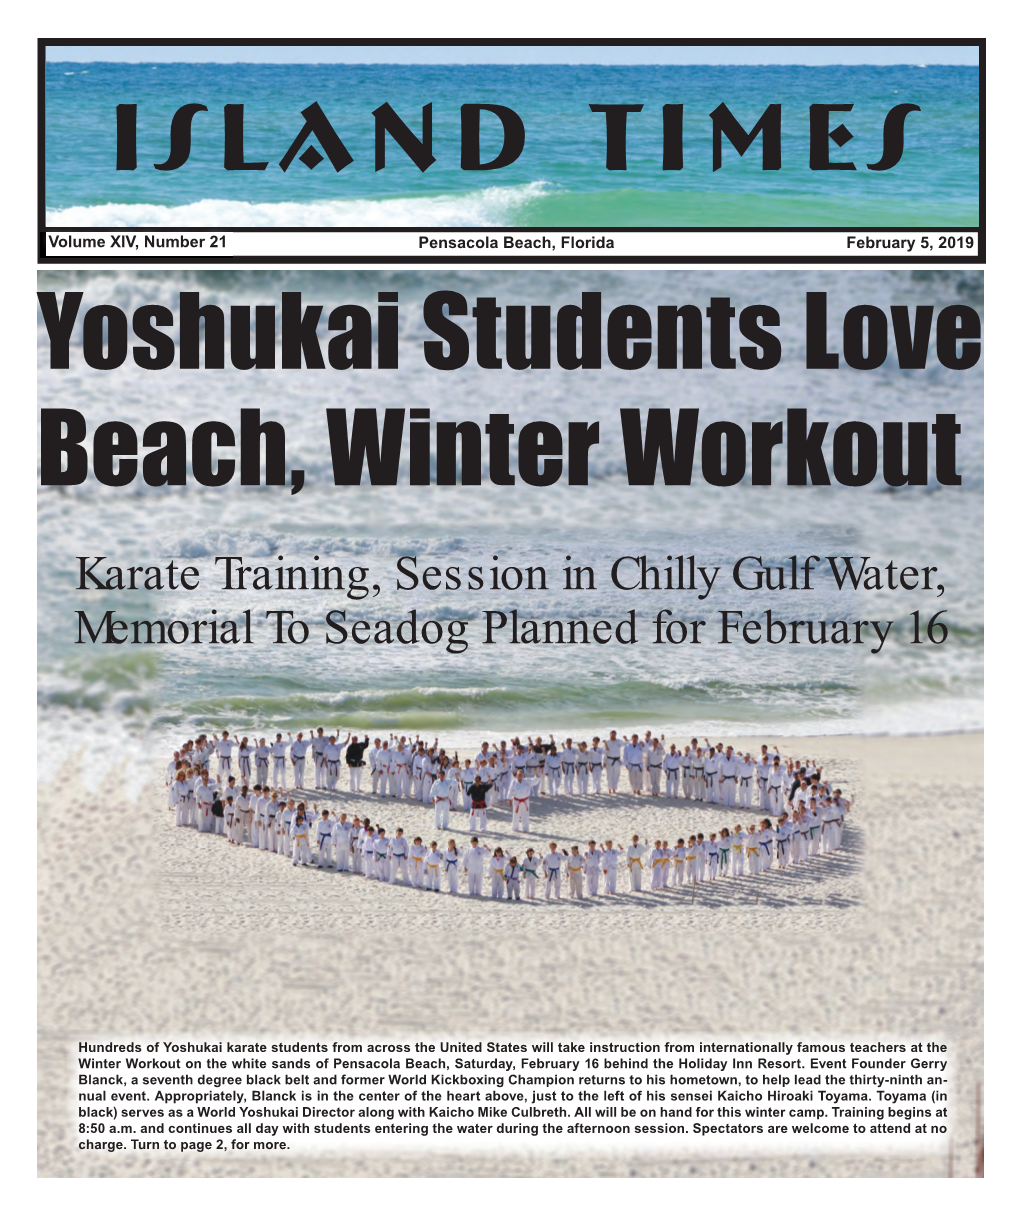 Karate Training, Session in Chilly Gulf Water, Memorial to Seadog Planned for February 16